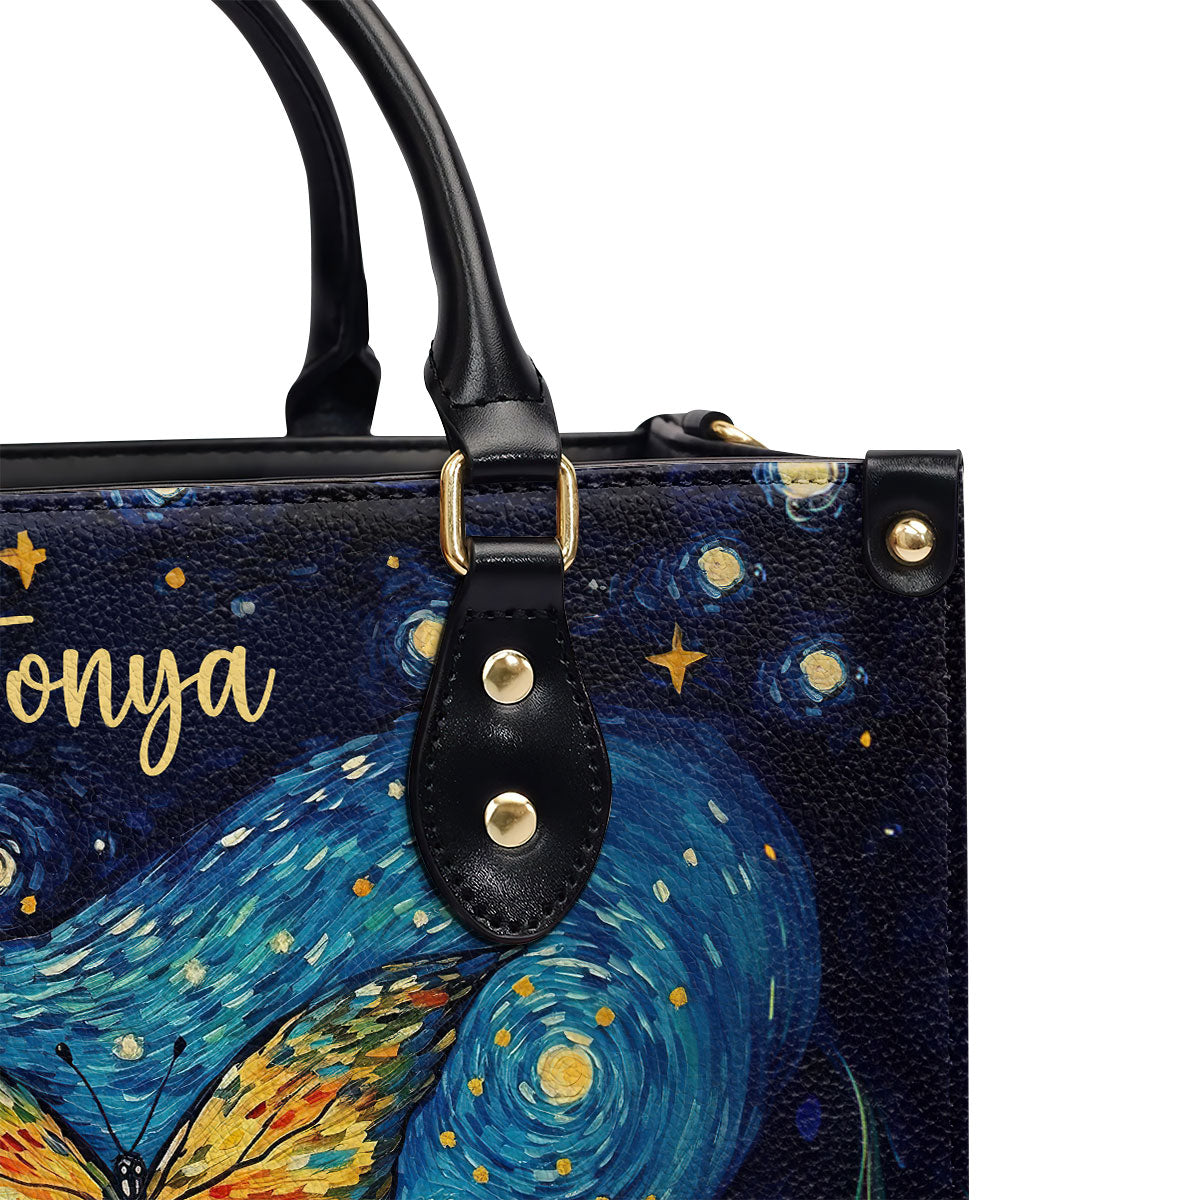 Butterfly In The Starry Night Style - Personalized Leather Handbag MSM06